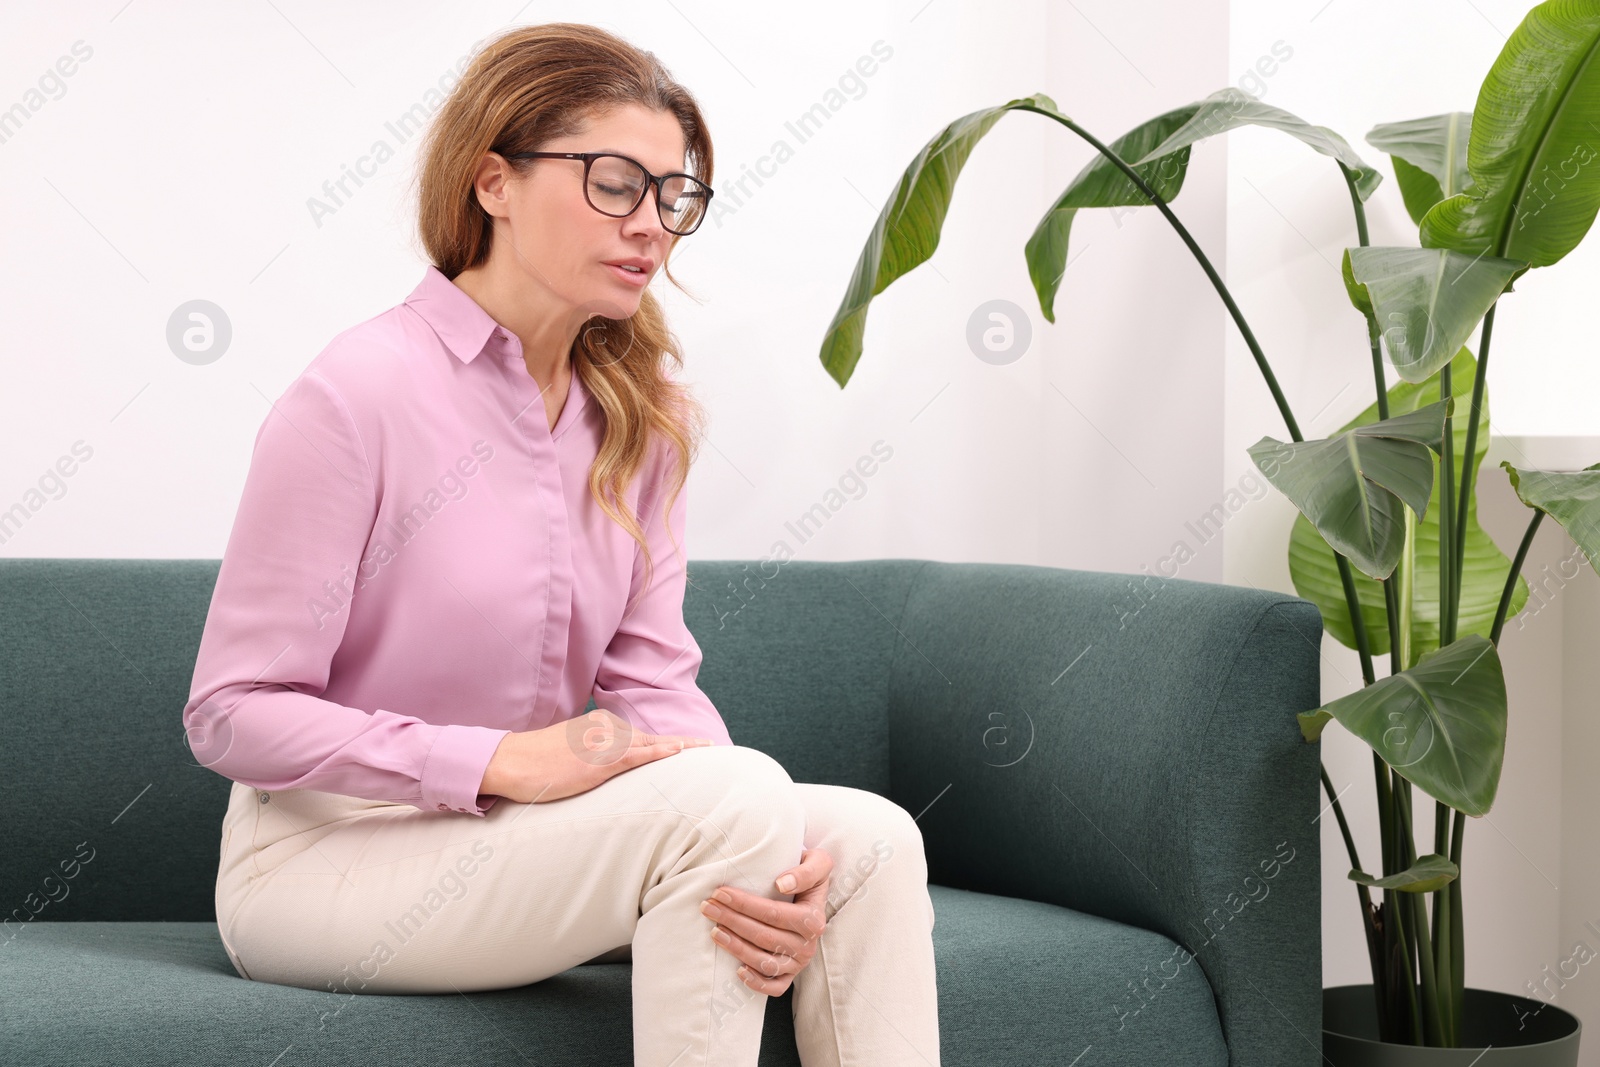 Photo of Woman suffering from knee pain on sofa indoors. Arthritis symptoms